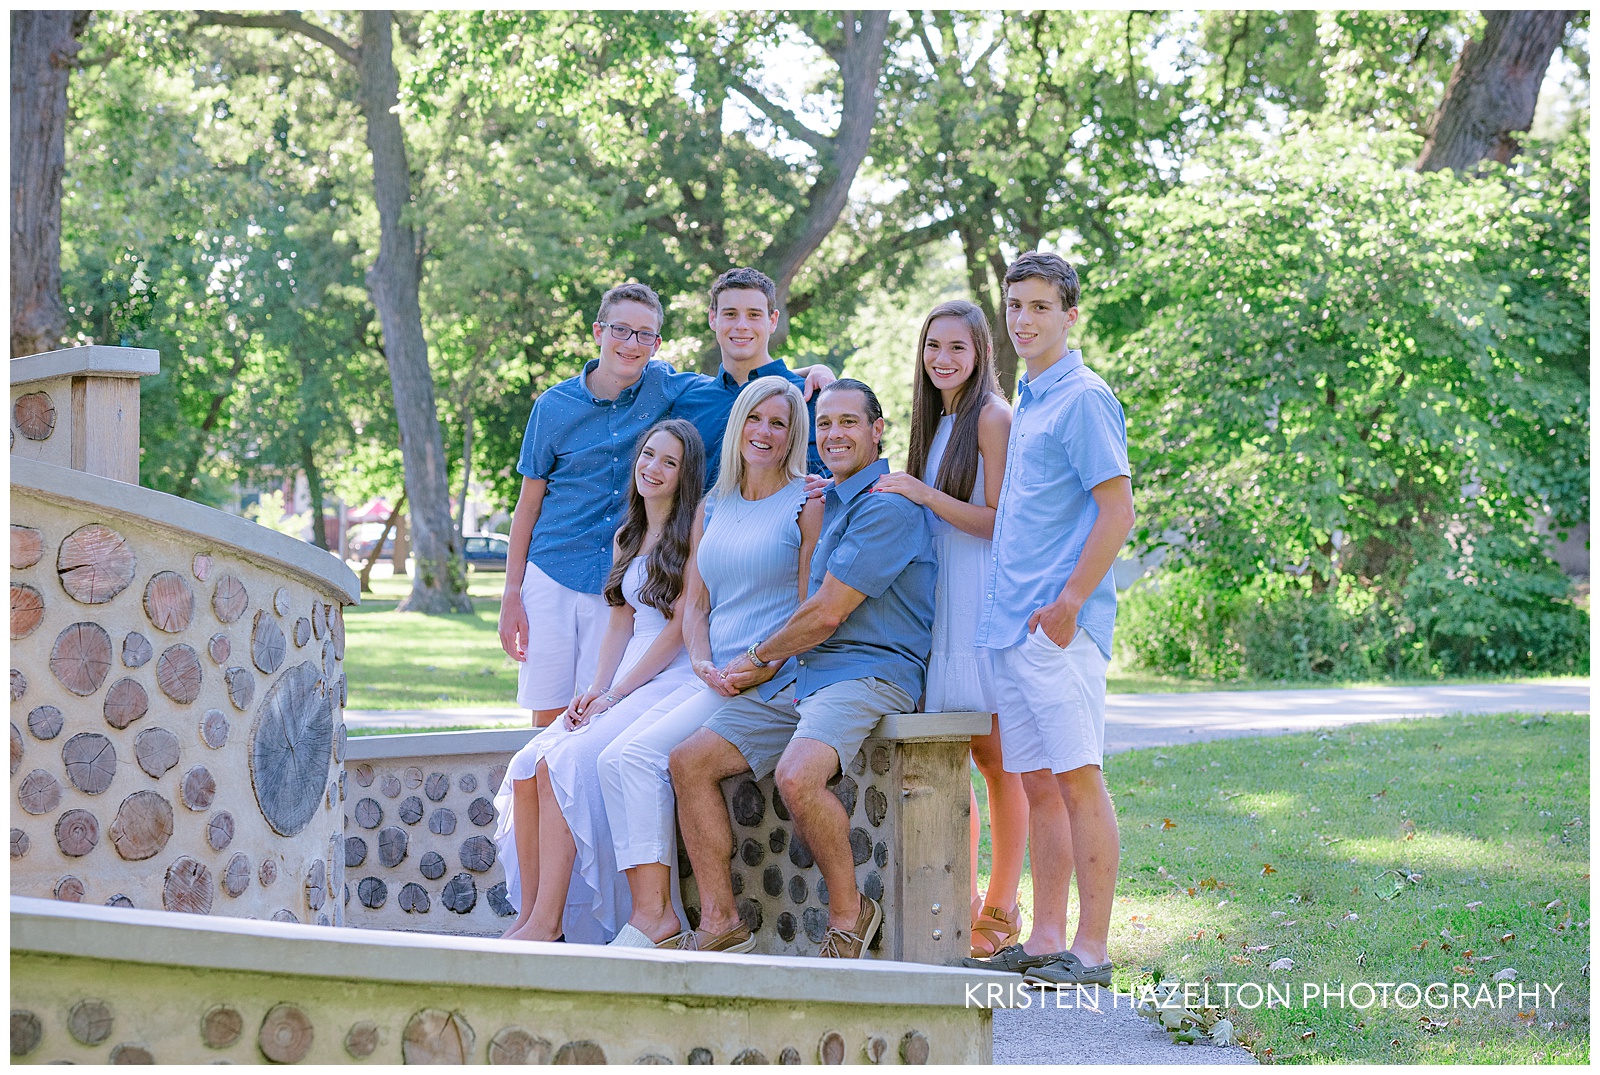 Family of seven sitting on a sculpture for a family portrait